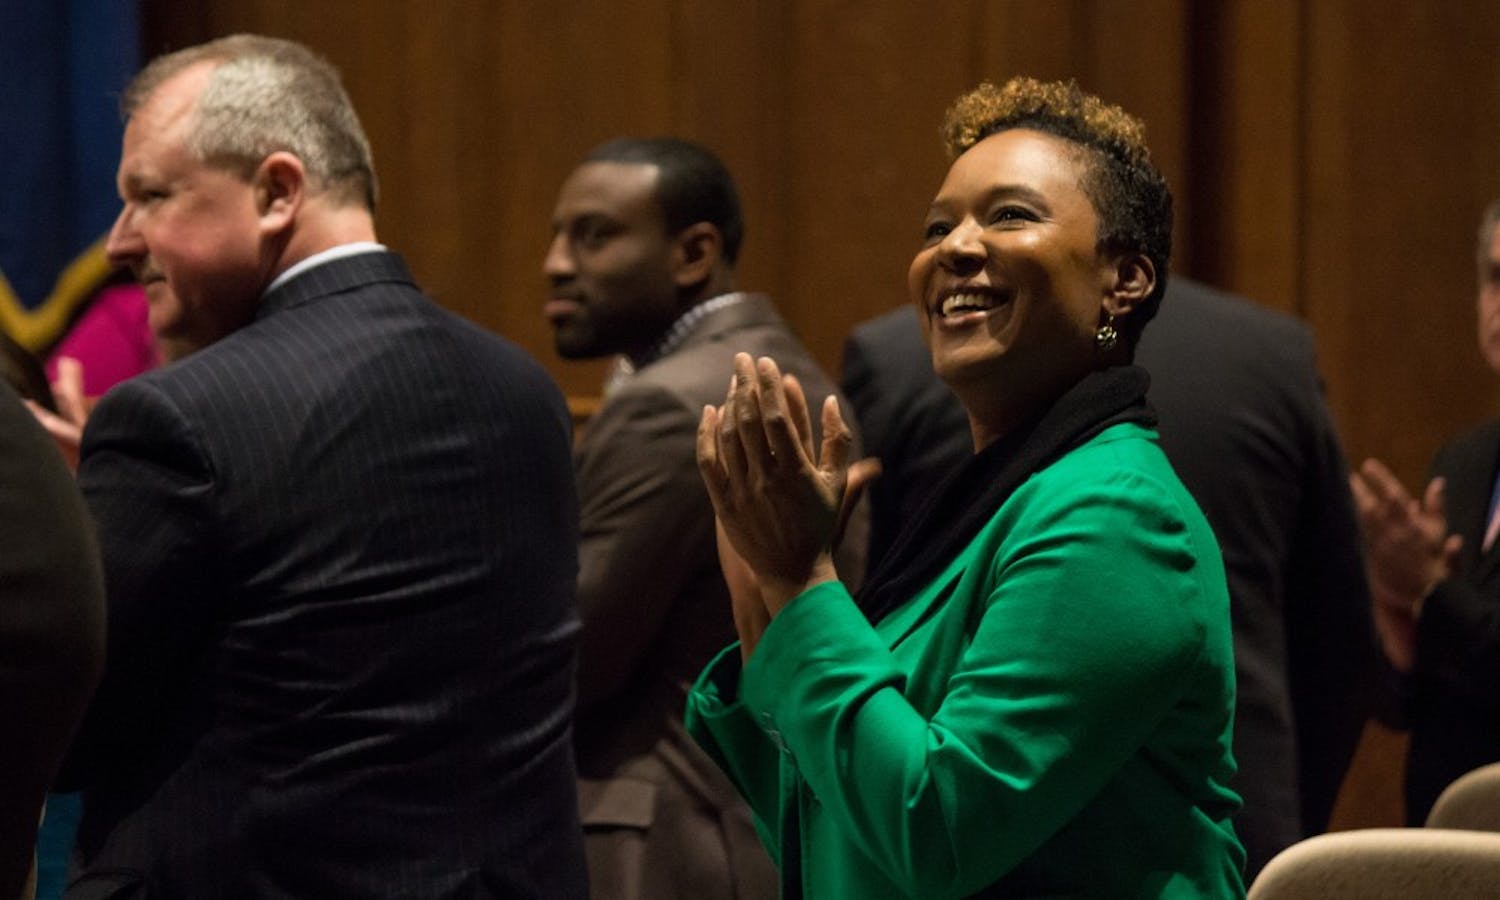 After more charges have been filed in the 2016 homicide of a Milwaukee prison inmate, State Sen. Lena Taylor has called for more oversight and resources for the treatment of people incarcerated by the state.